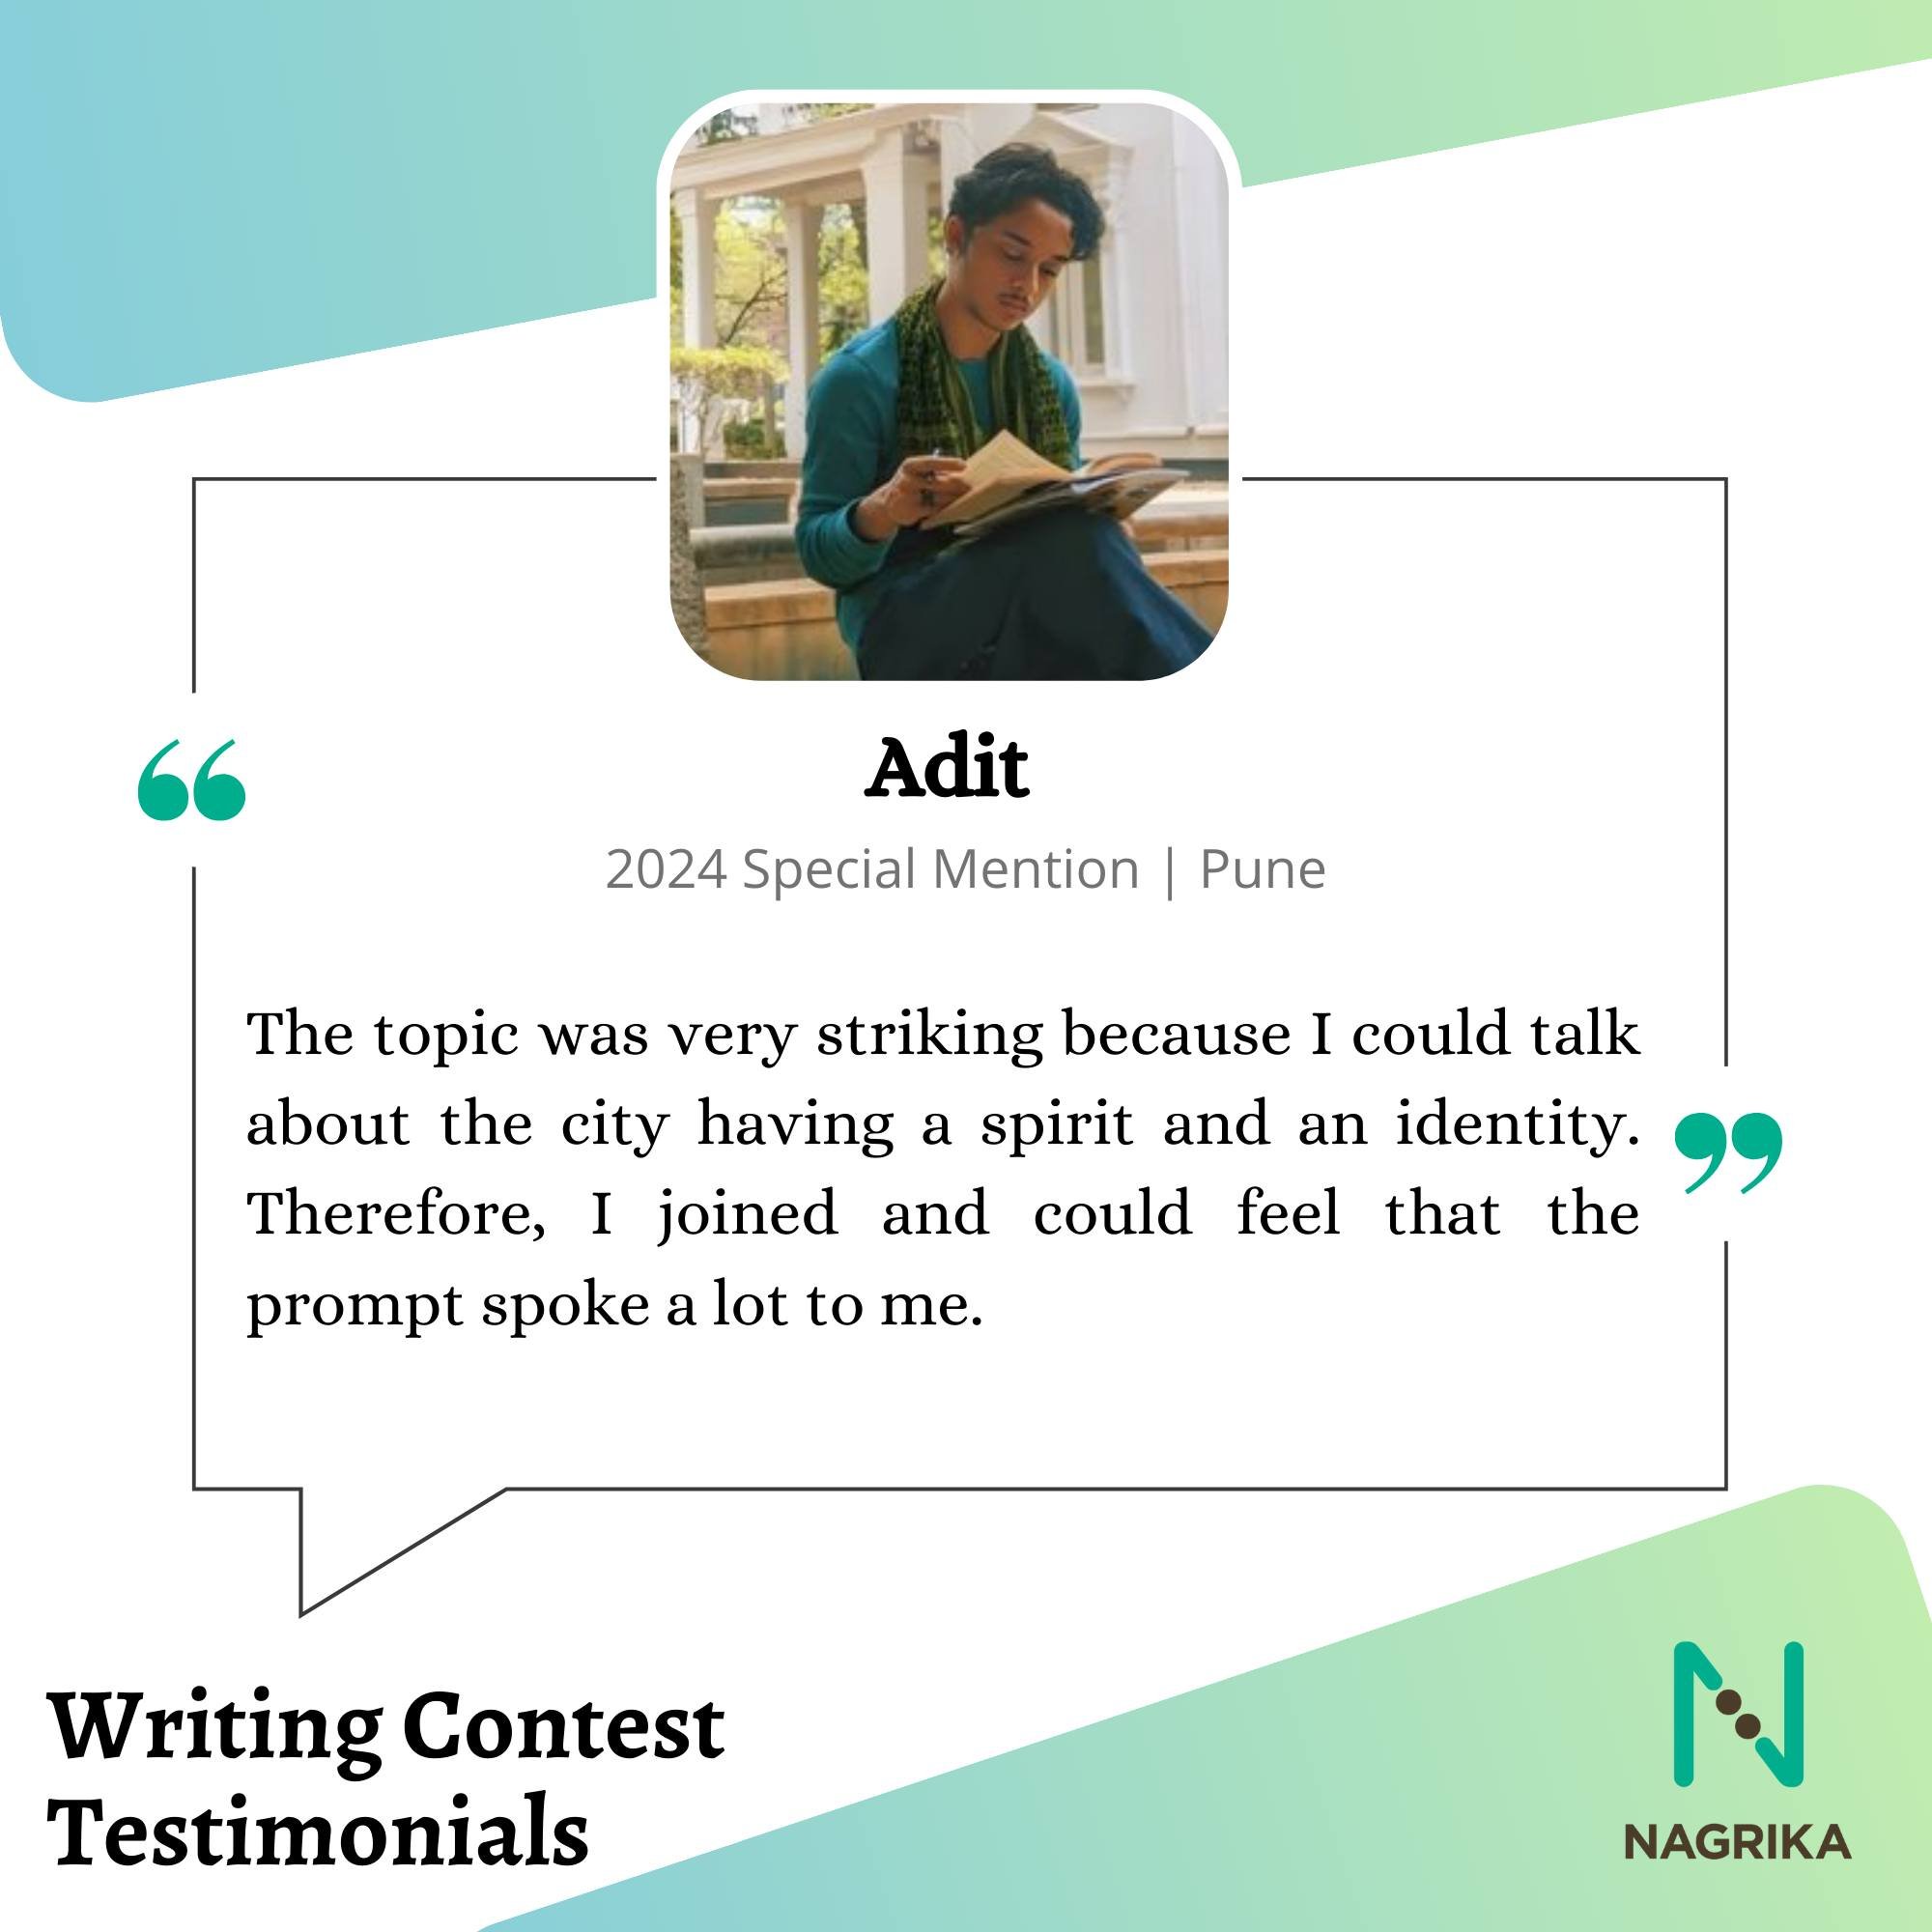 The most awaited Nagrika Youth Writing Contest 2024 will be starting soon!

Our 2023 Youth Writing Contest was remarkable as it left on us, a core memory of our participants&rsquo; expressions of thoughts.

Here is what our 2nd prize winner, Roma has